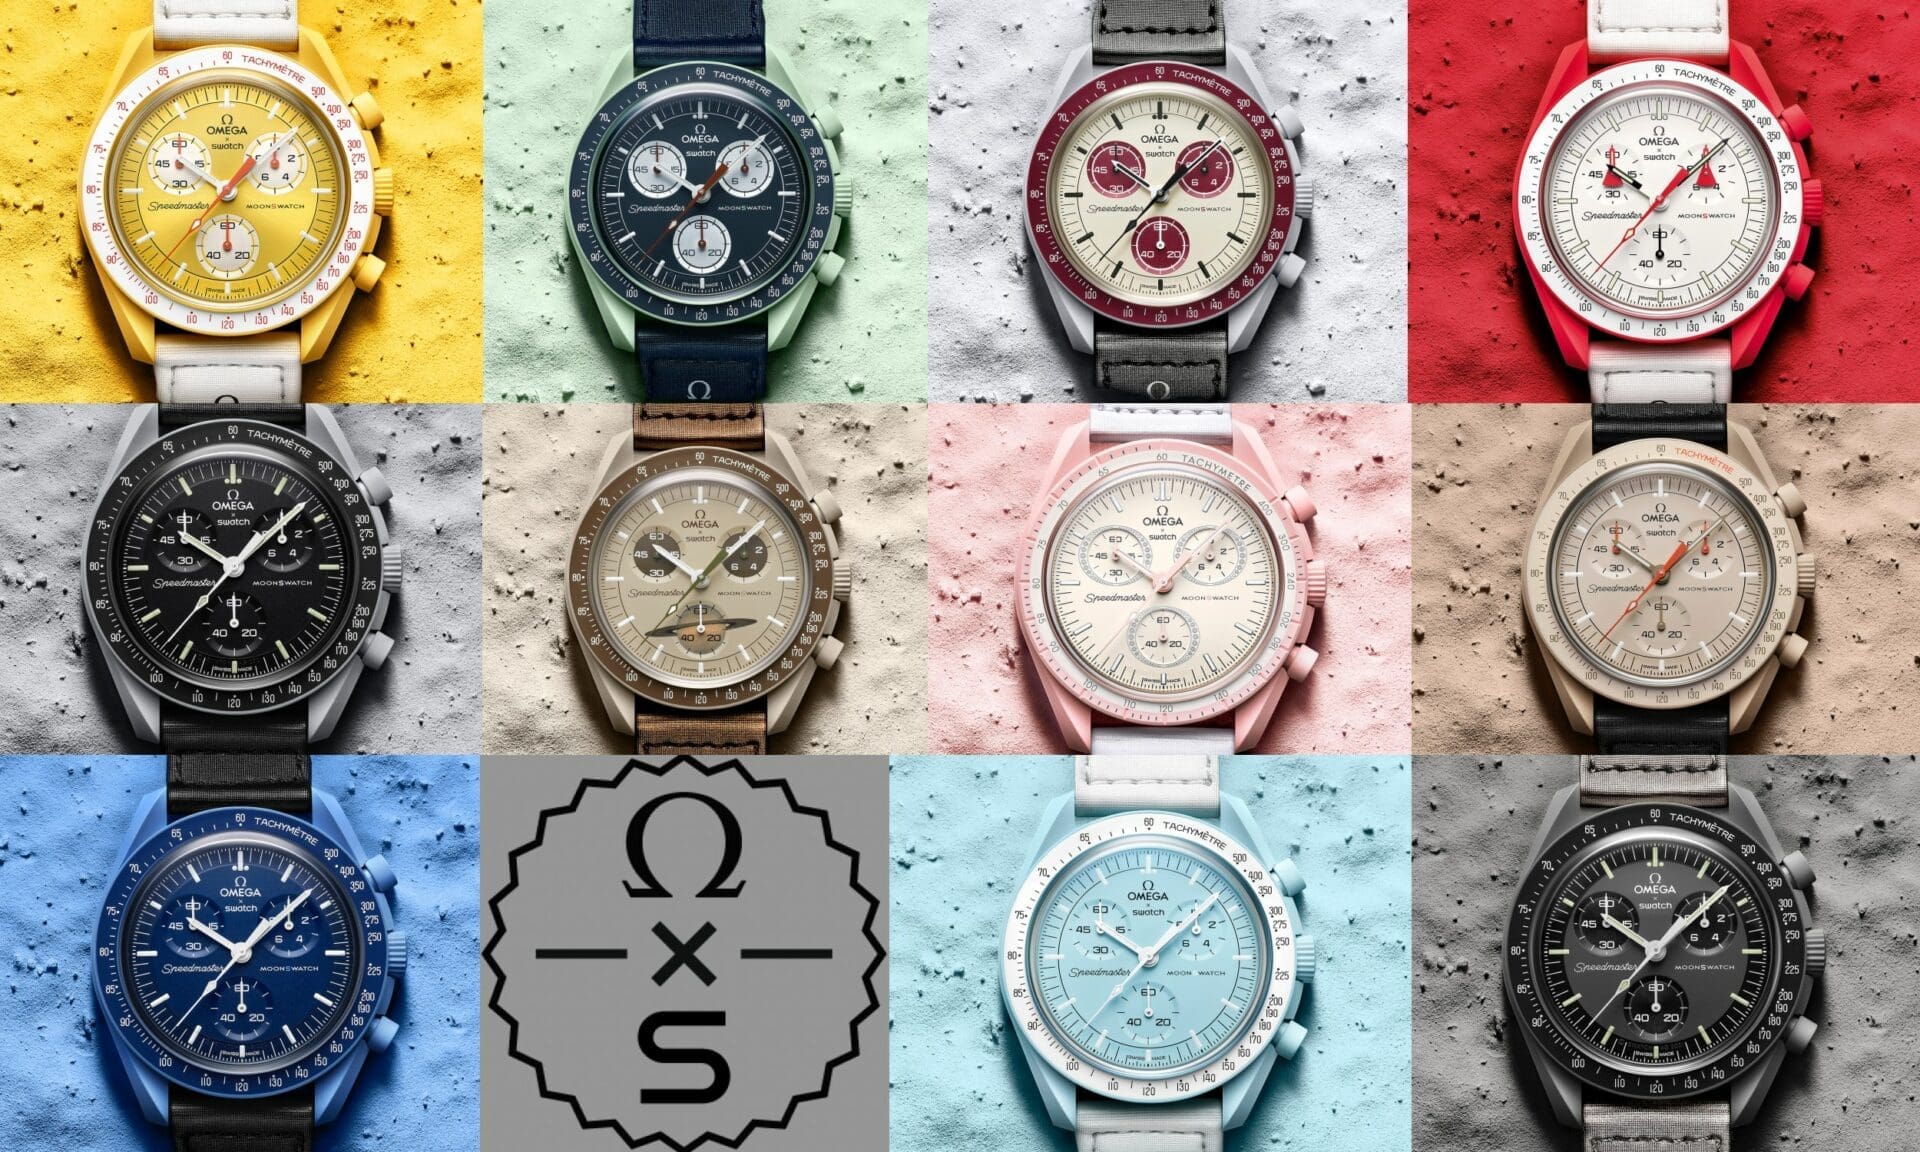 Omega x Swatch blast off together on the BioCeramic MoonSwatch collection